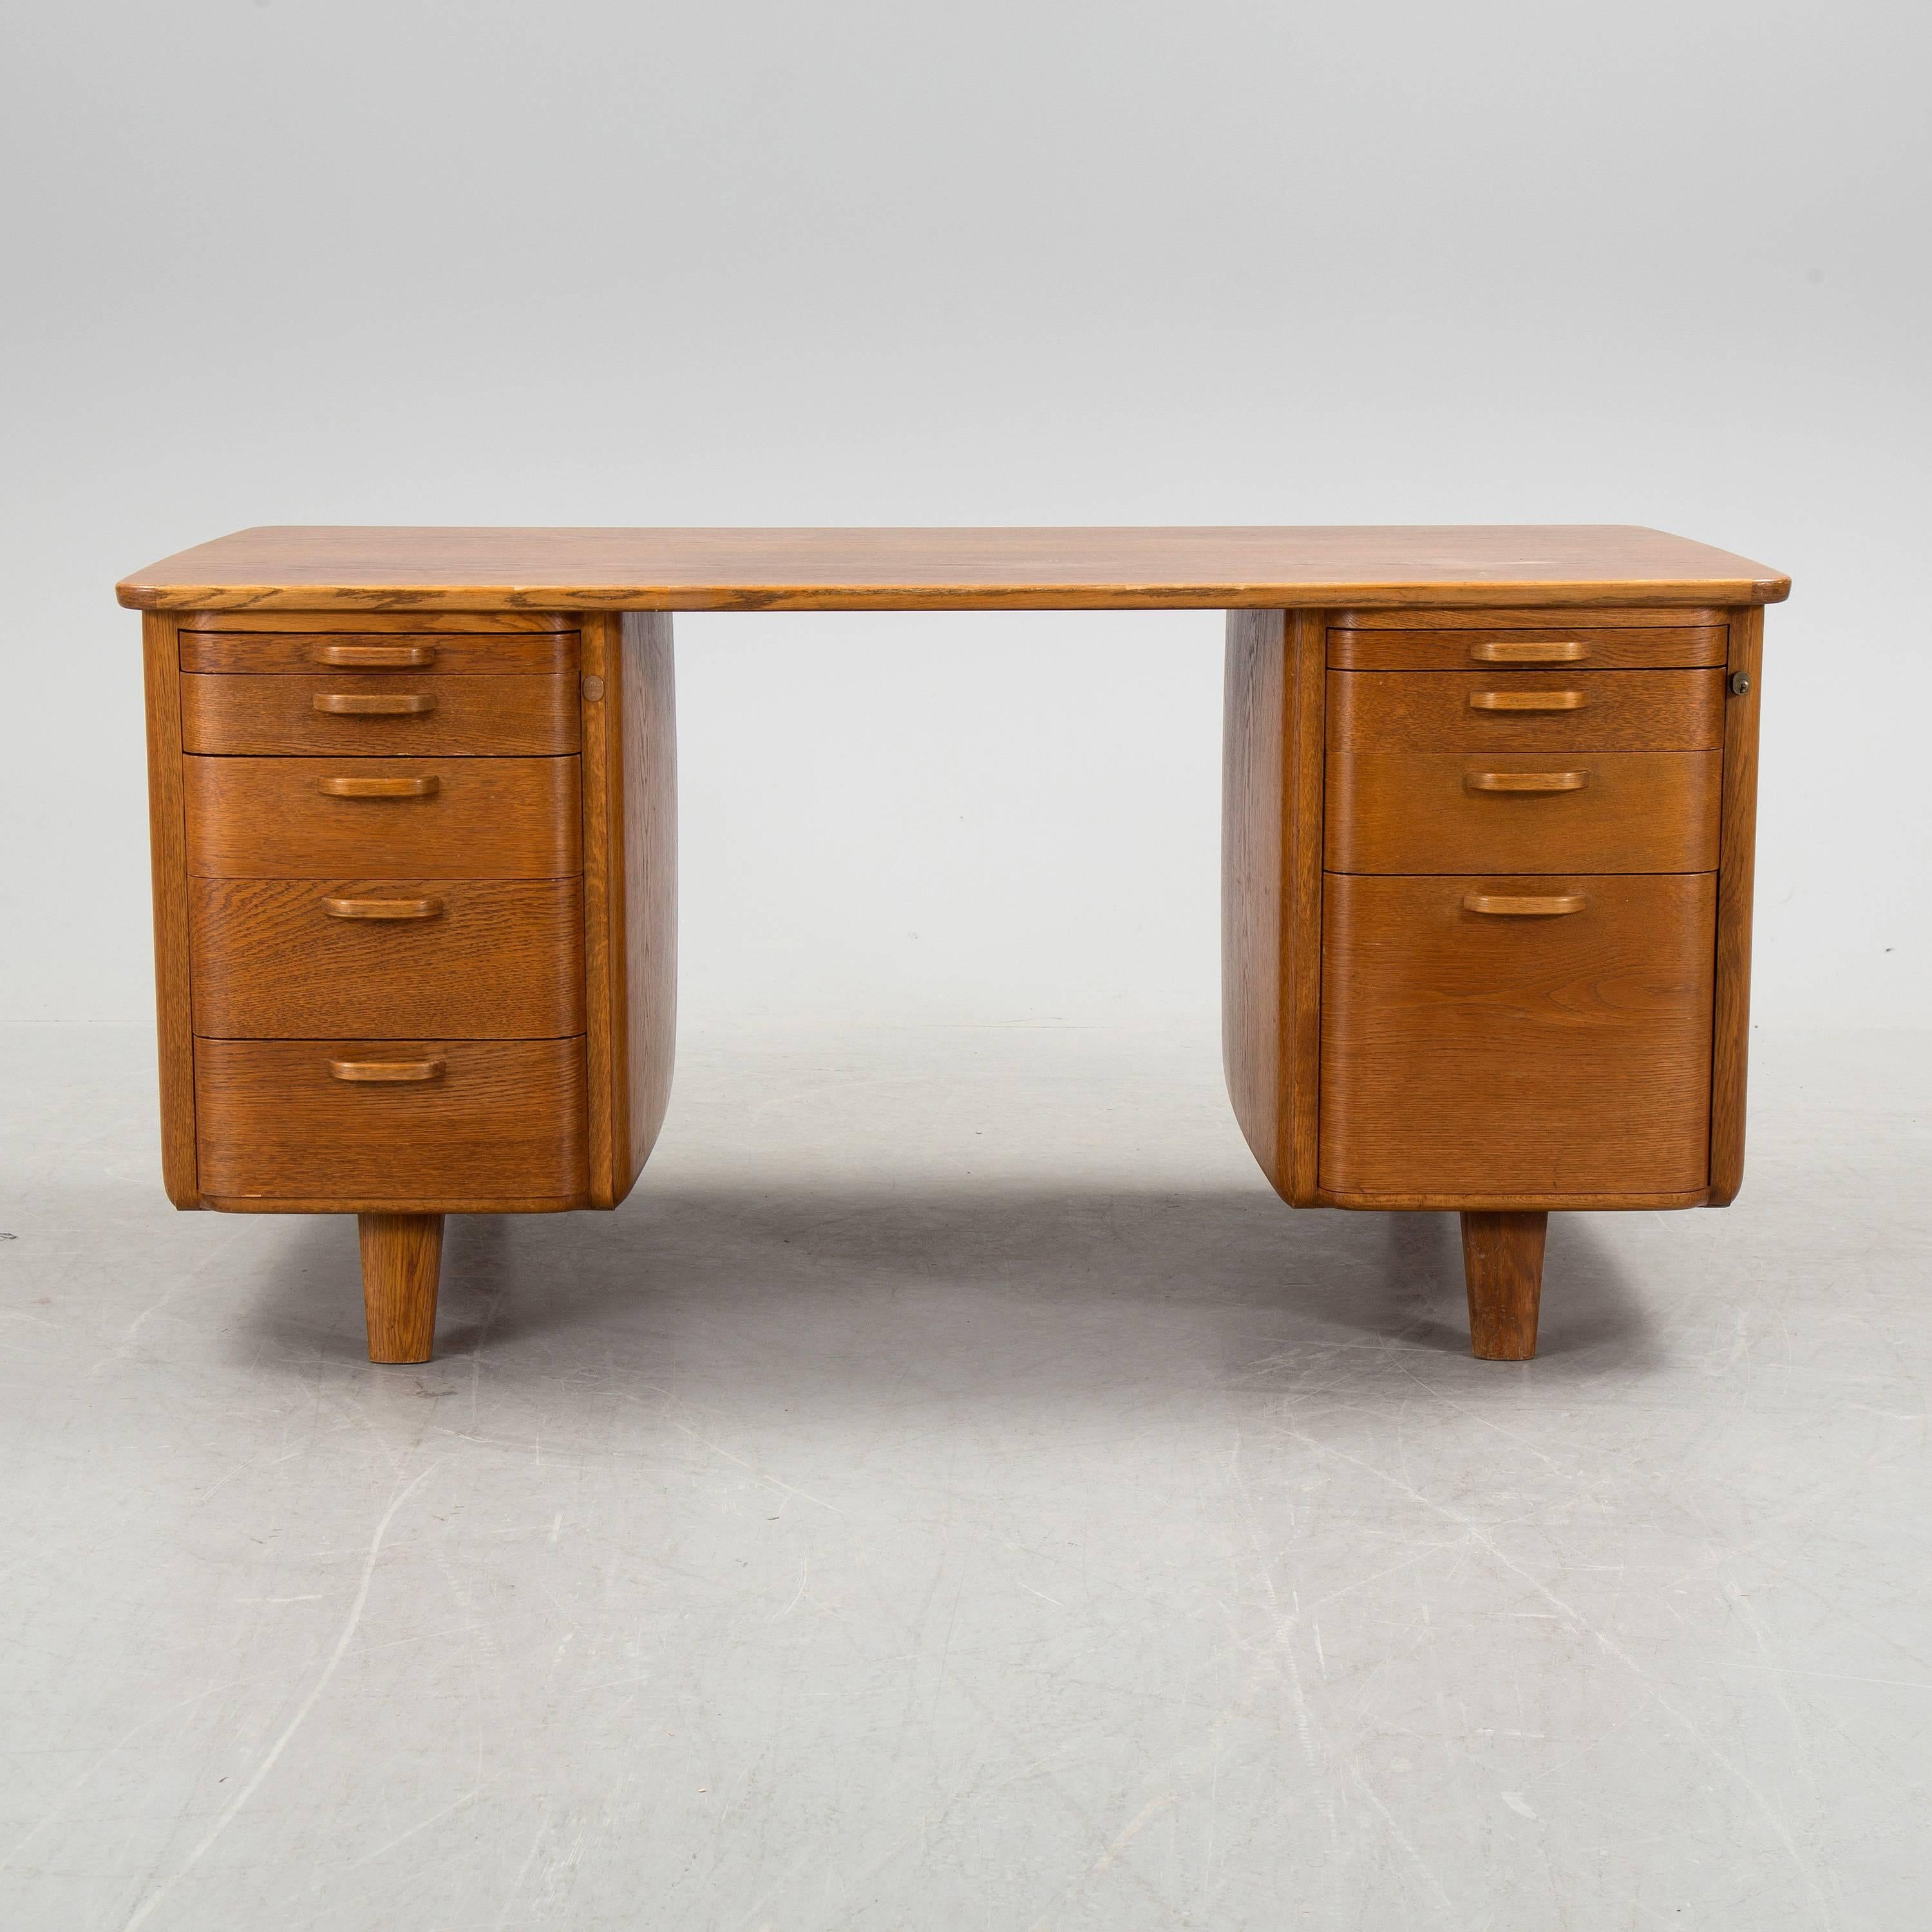 Art Deco desk and swivel armchair made in teak by Gunnar Ericsson for Facit AB in Atvidaberg, Sweden, circa 1930.

Chair with original wool upholstery.

Excellent conditions.